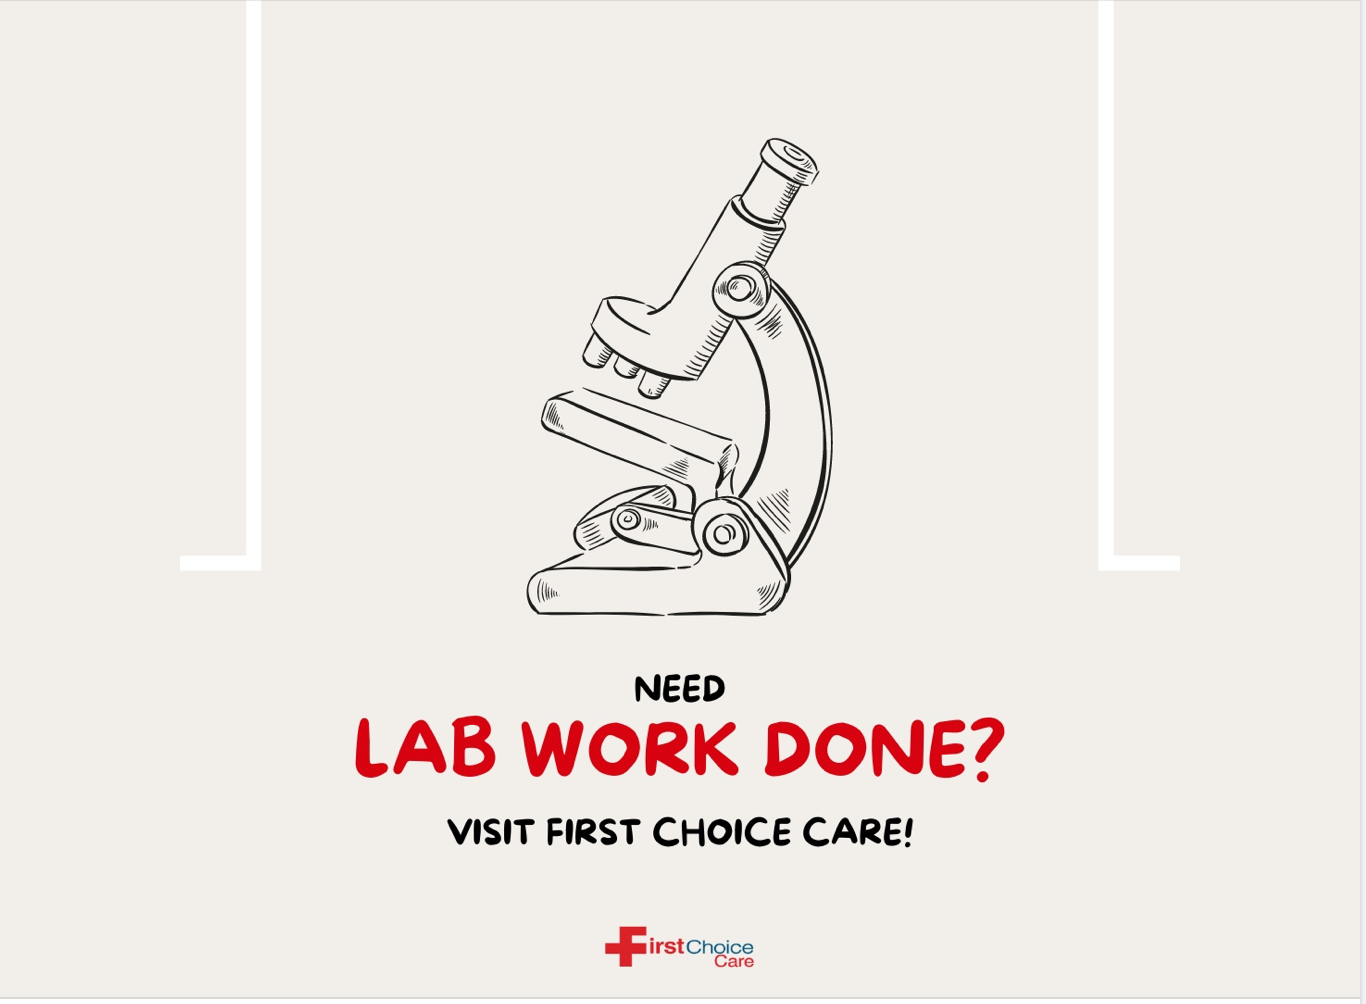 First Choice Care has lab and screening services on premises to make your experience as seamless as possible! Whether you need a strep test, a flu test, or something else, we can help!